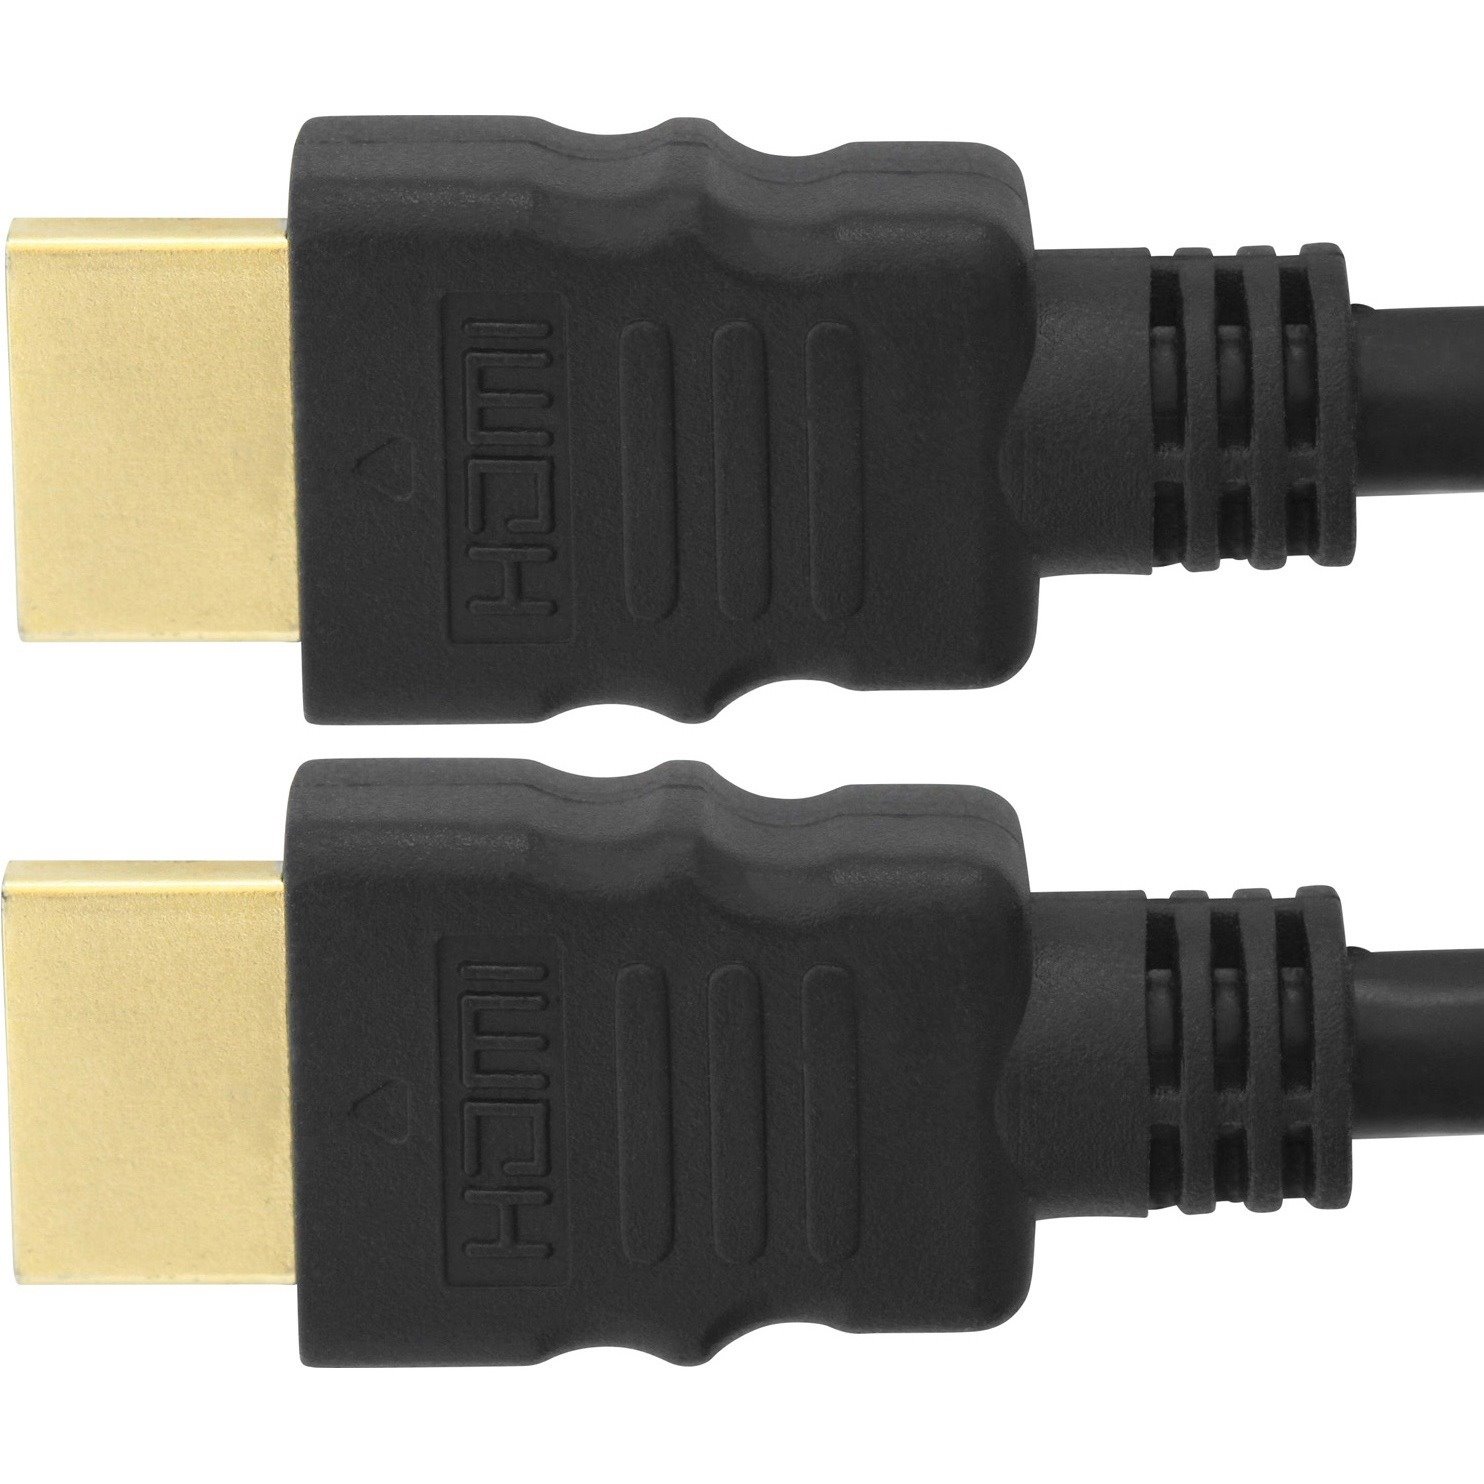 4XEM 100FT 30M High Speed HDMI cable fully supporting 1080p 3D, Ethernet and Audio return channel